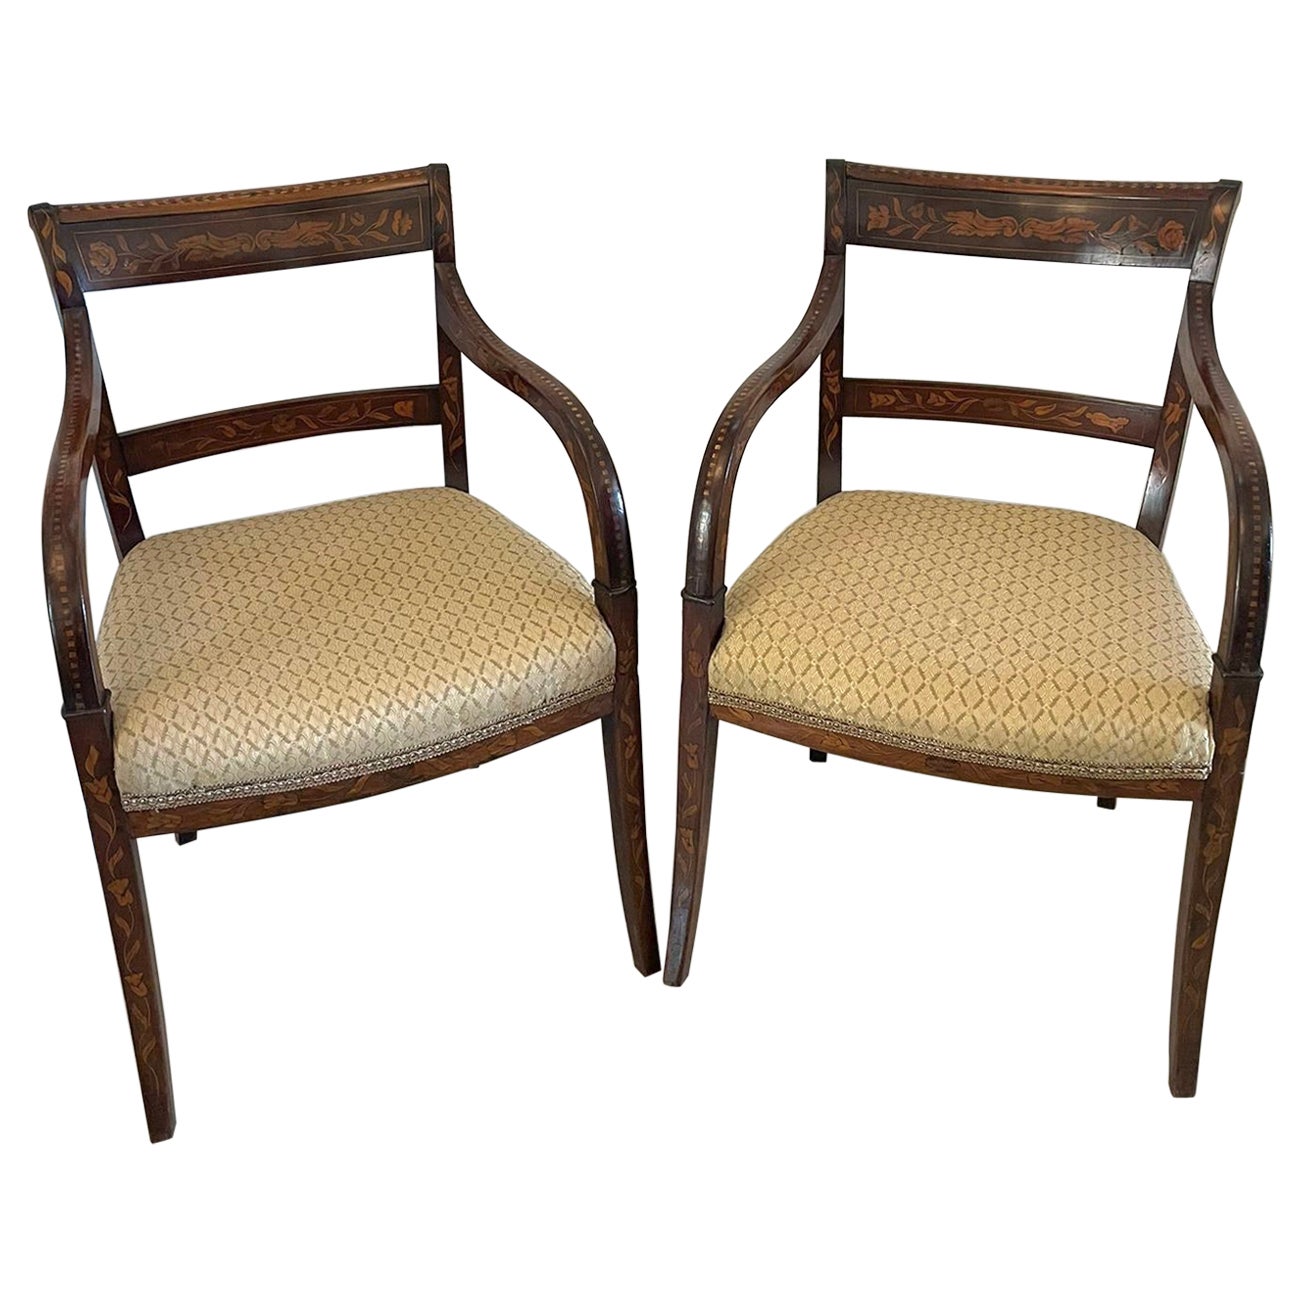 Fine Pair of Antique Regency Quality Floral Marquetry Inlaid Desk Chairs 